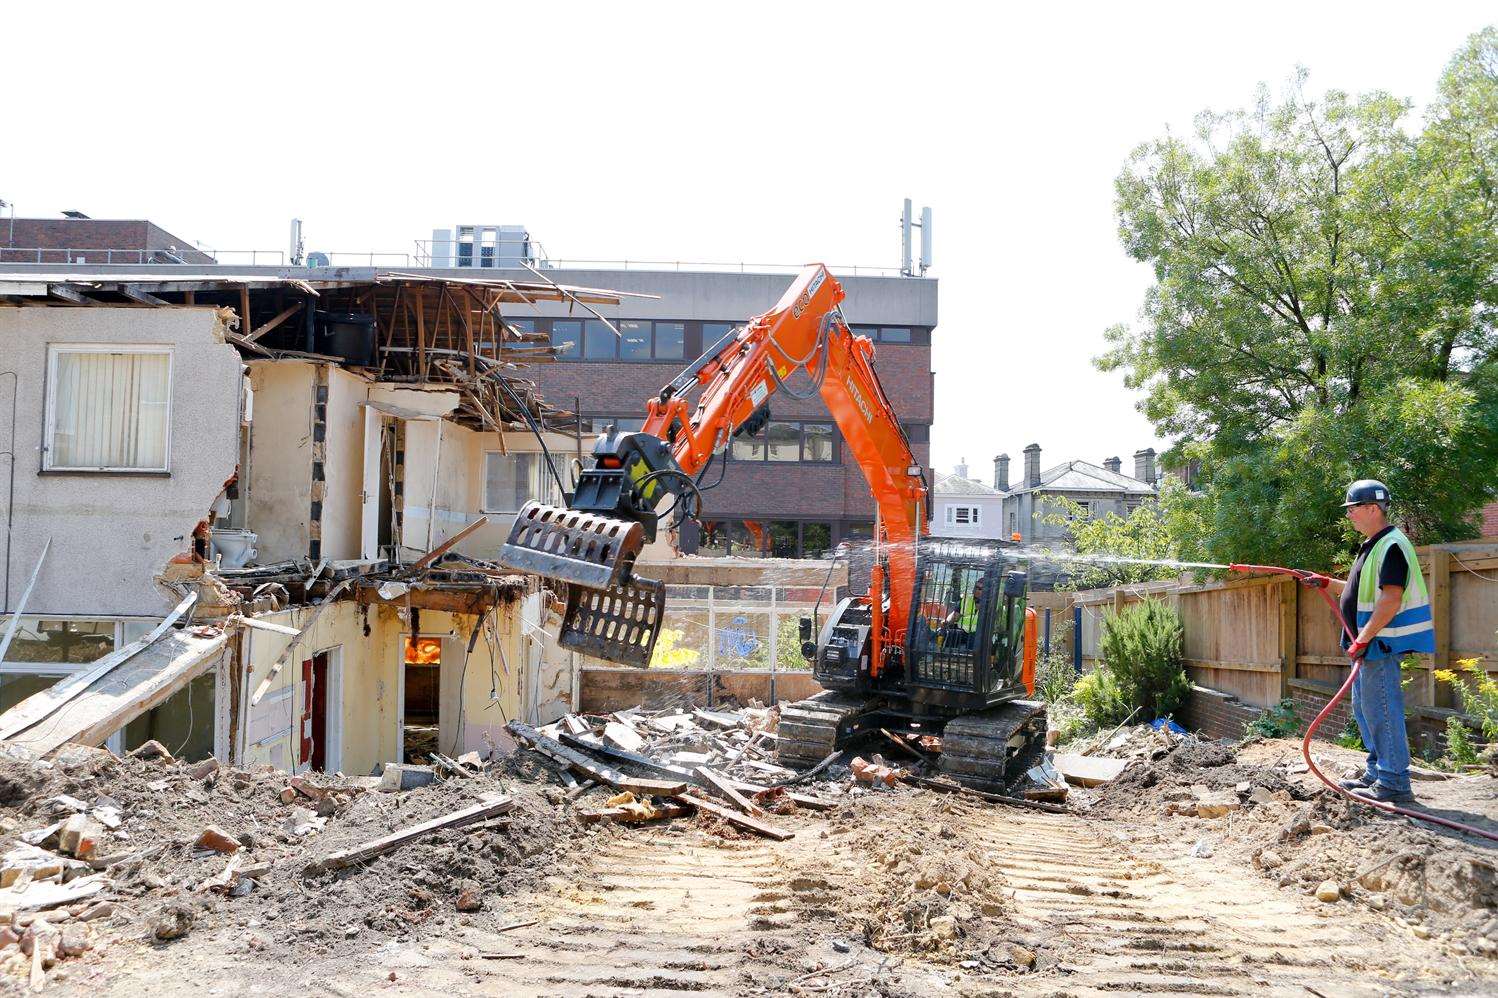 The old doctor's surgery on the southern side of the site was demolished earlier this year